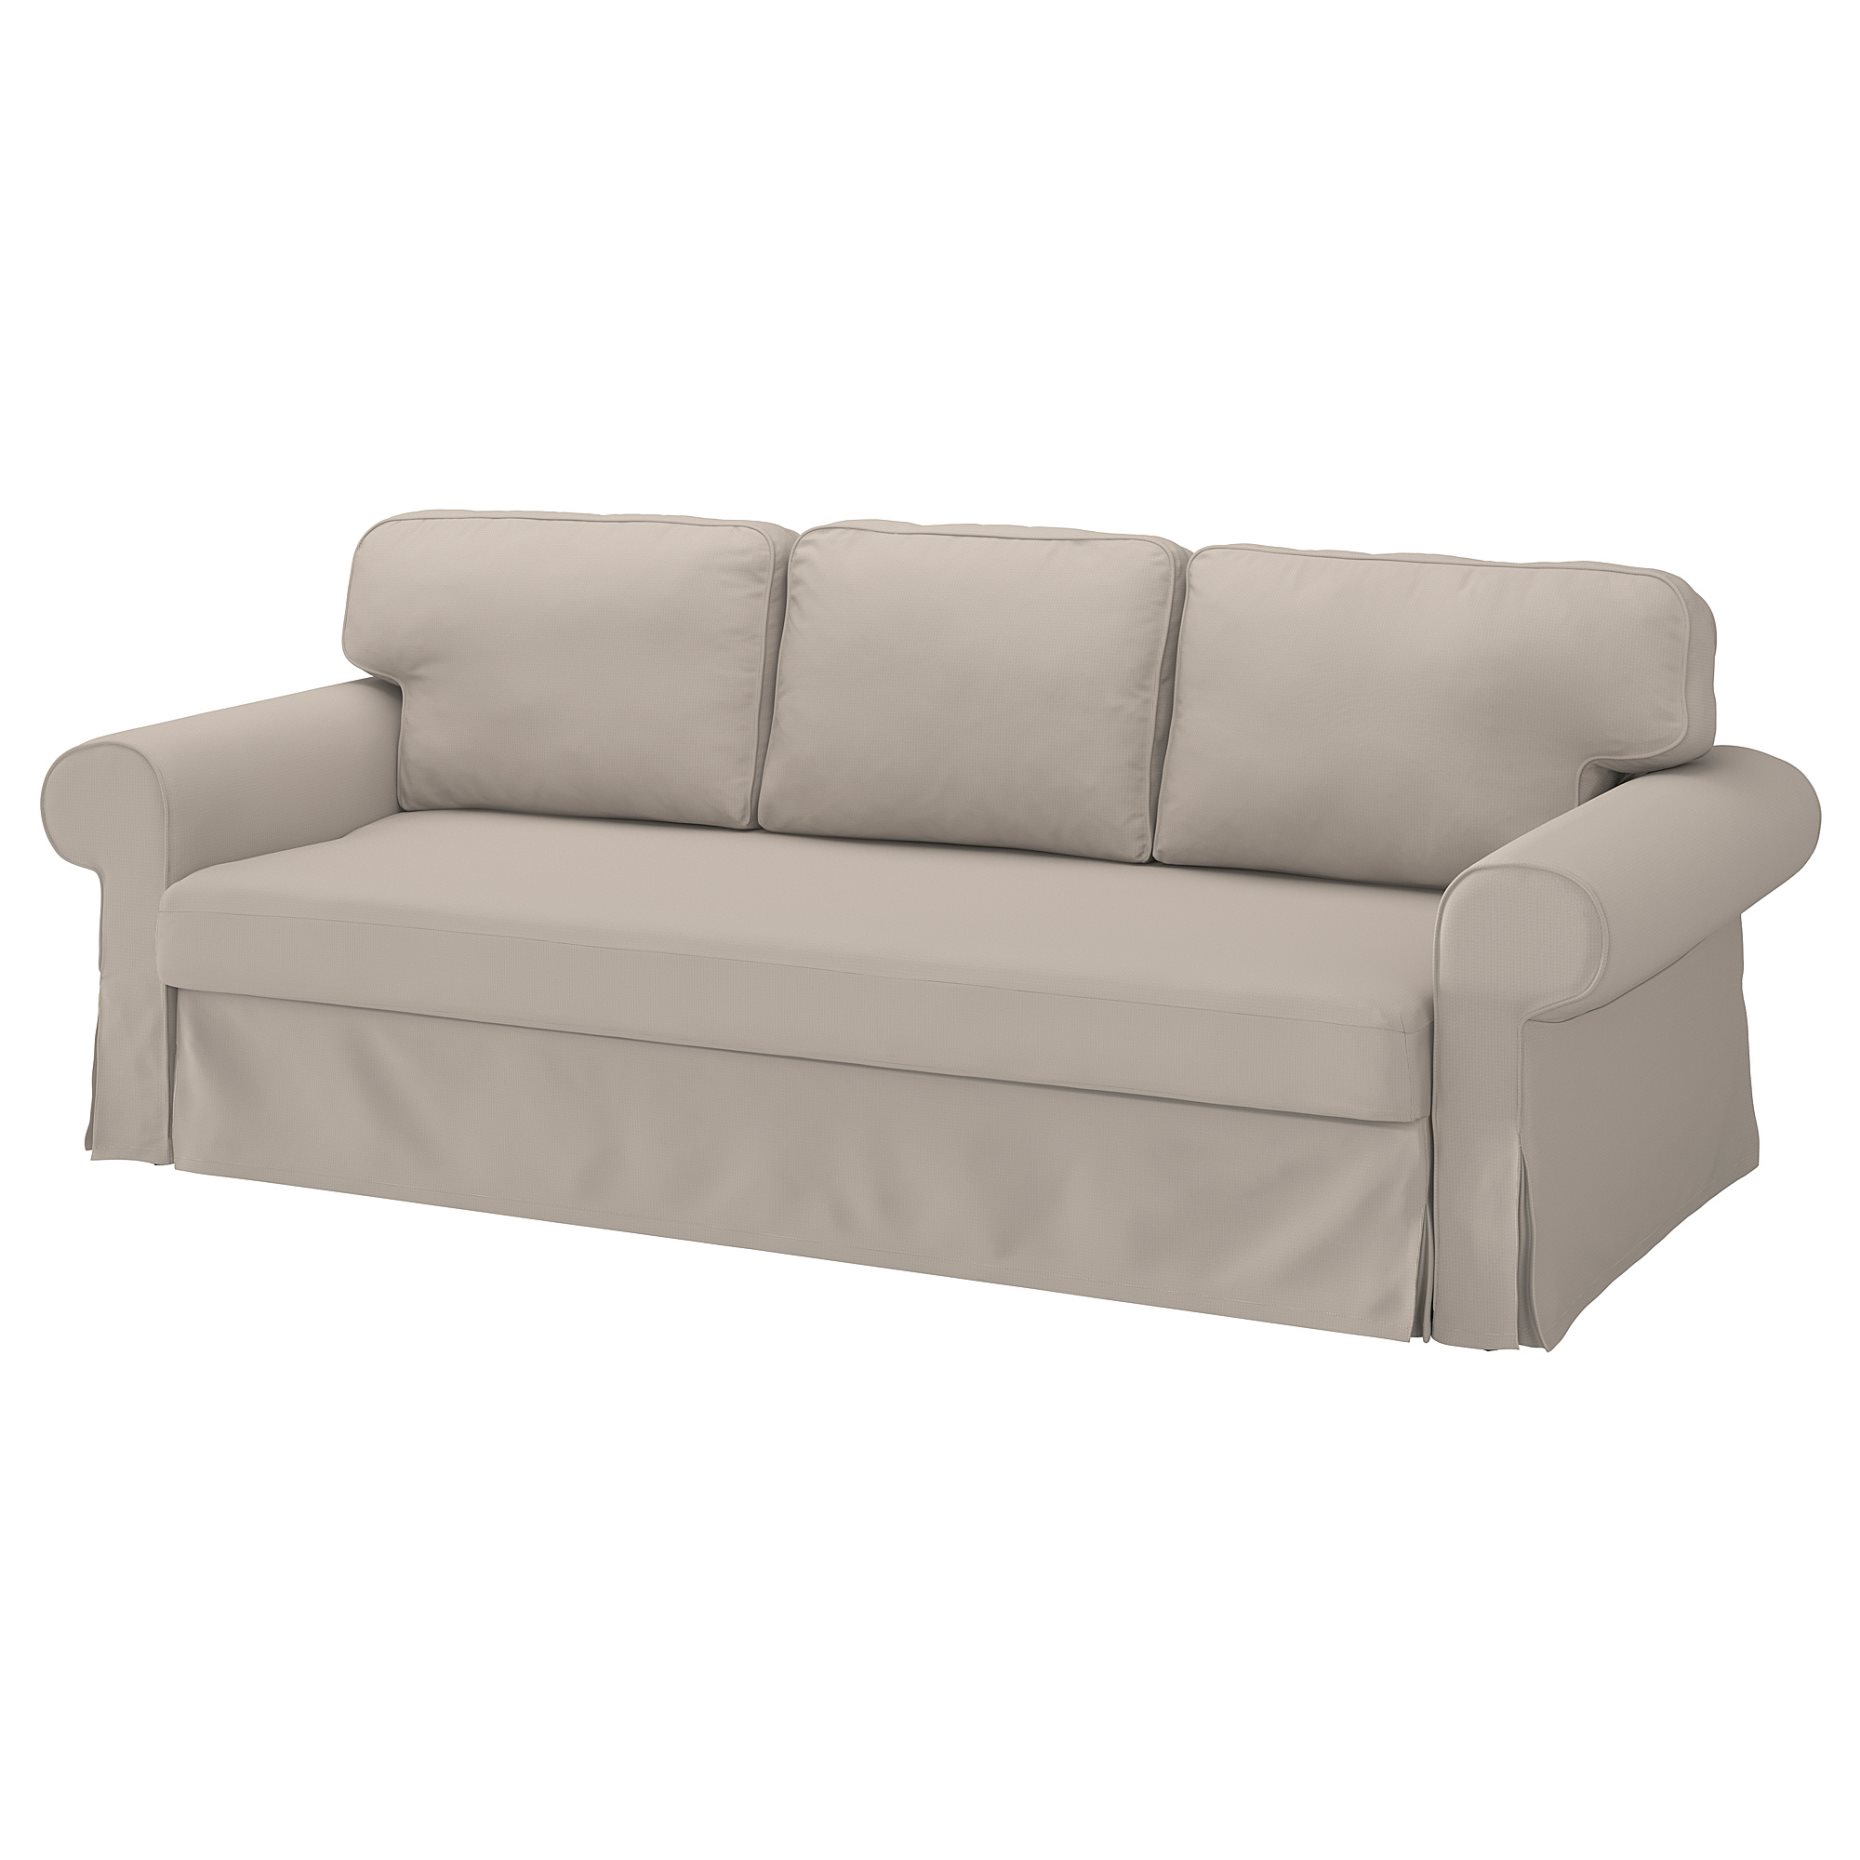 VRETSTORP, cover for 3-seat sofa-bed, 304.726.25